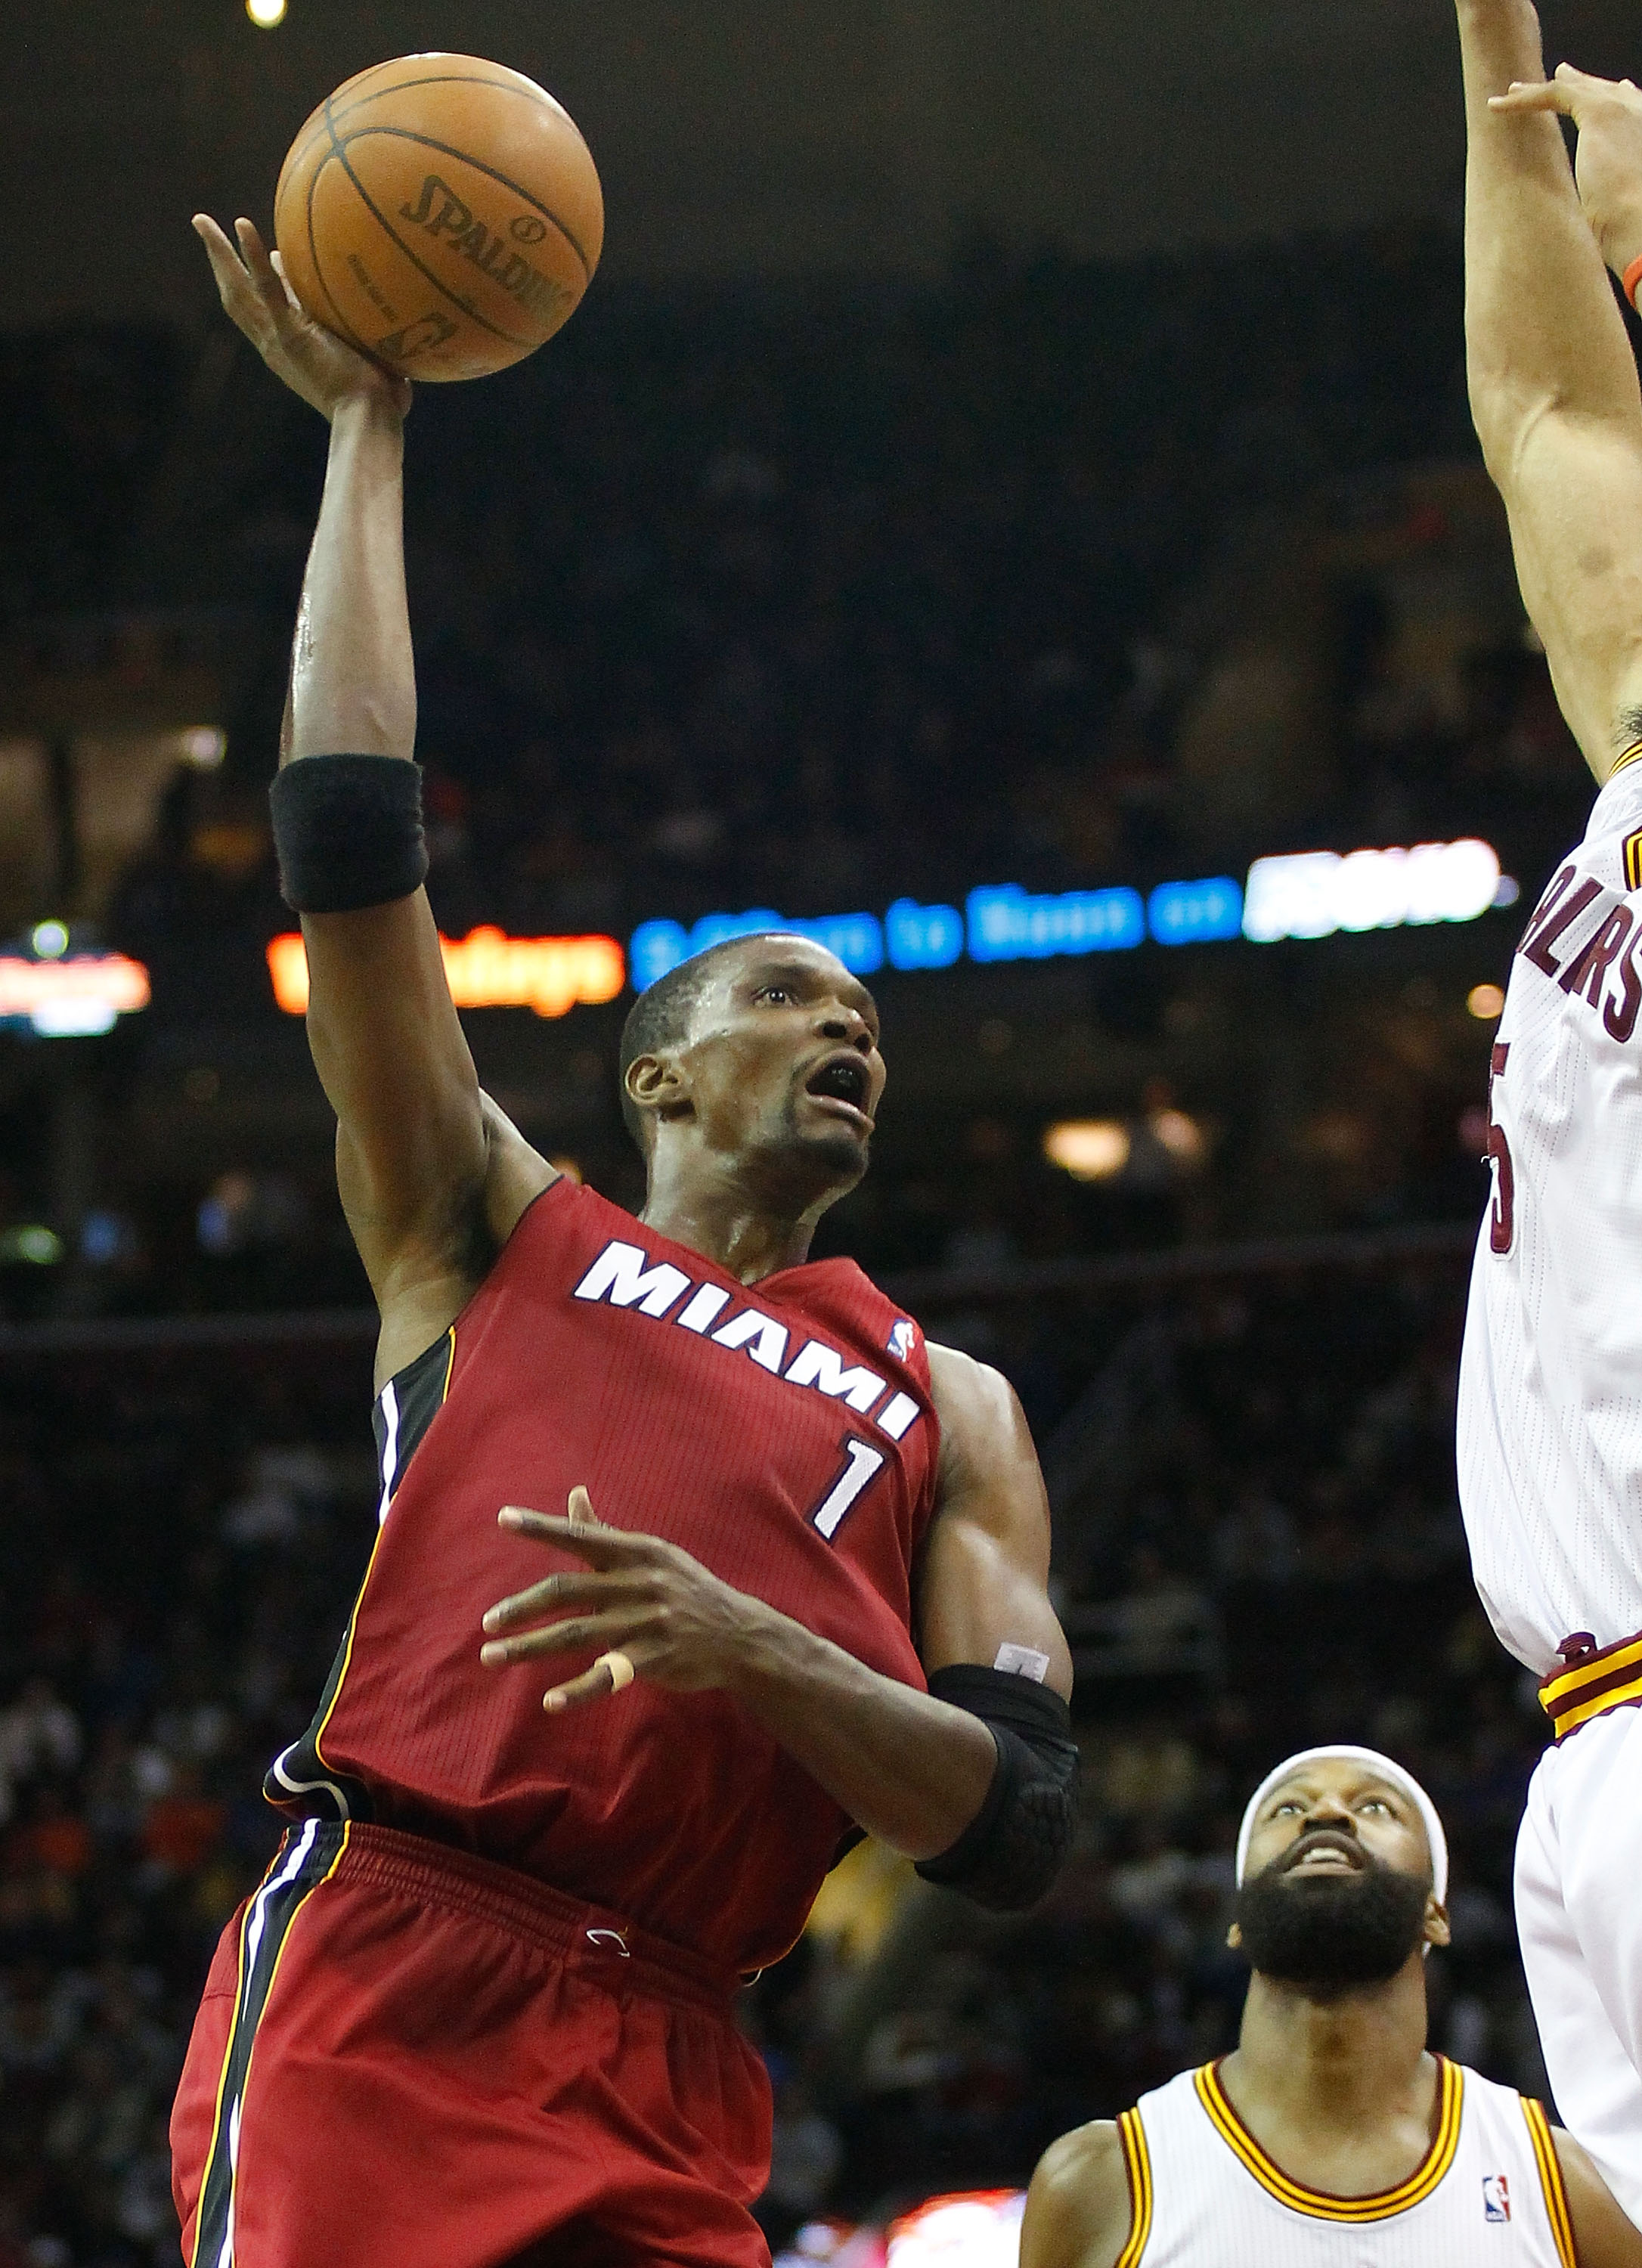 CLEVELAND - MARCH 29: Chris Bosh #1 of the Miami Heat attempts a shot during the game against the Cleveland Cavaliers on March 29, 2011 at Quicken Loans Arena in Cleveland, Ohio. NOTE TO USER: User expressly acknowledges and agrees that, by downloading an